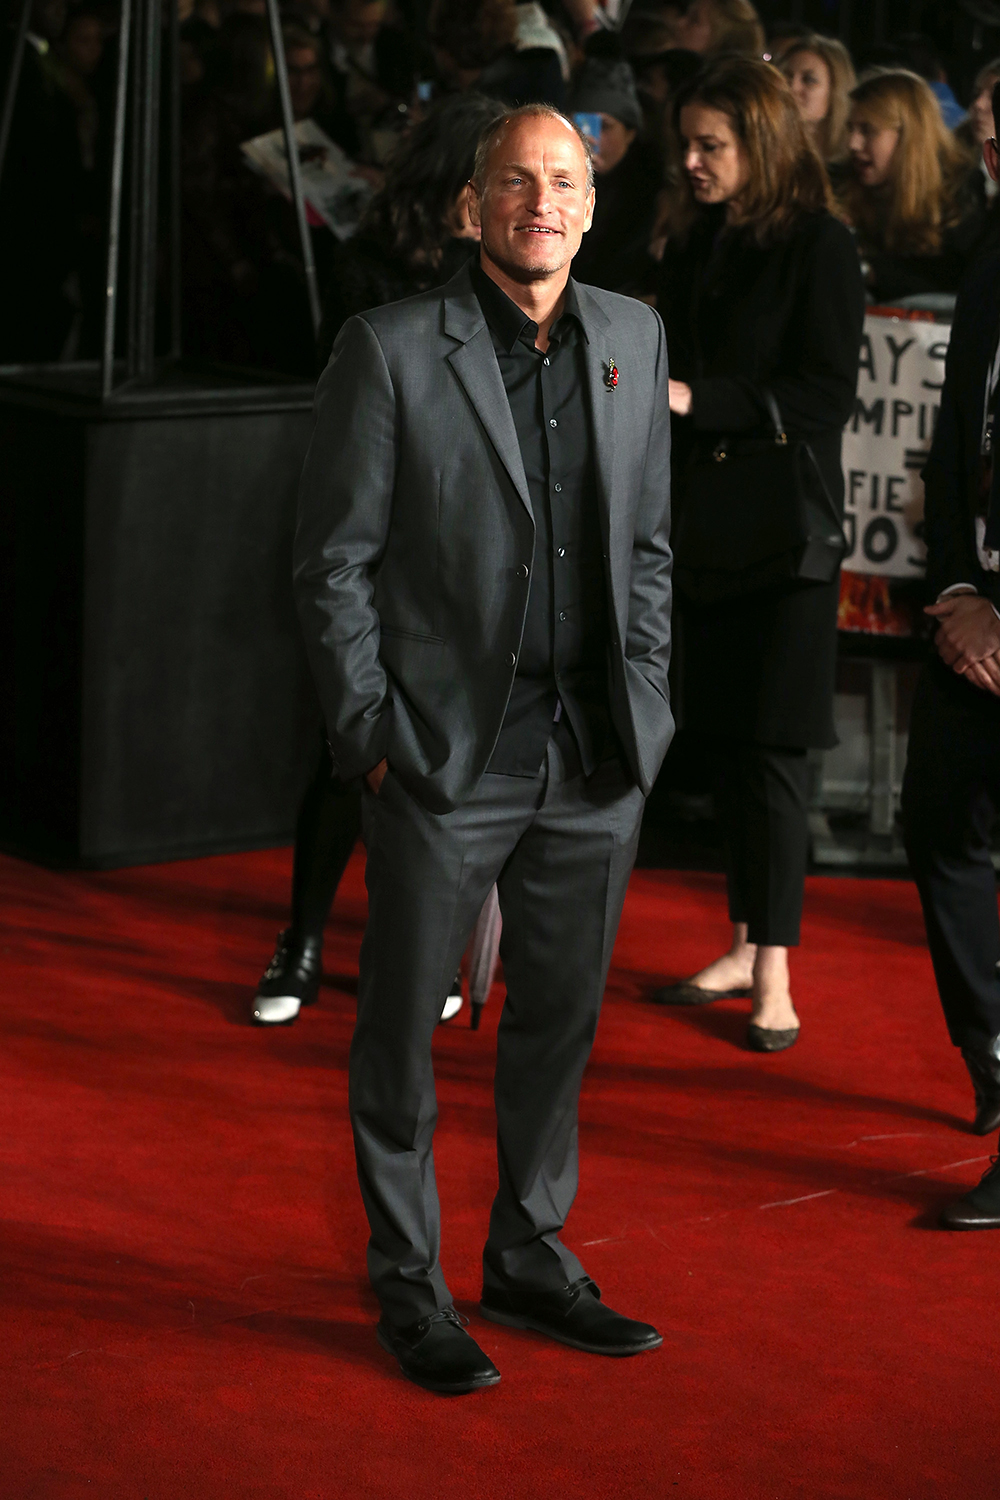 Woody Harrelson at the London premiere.